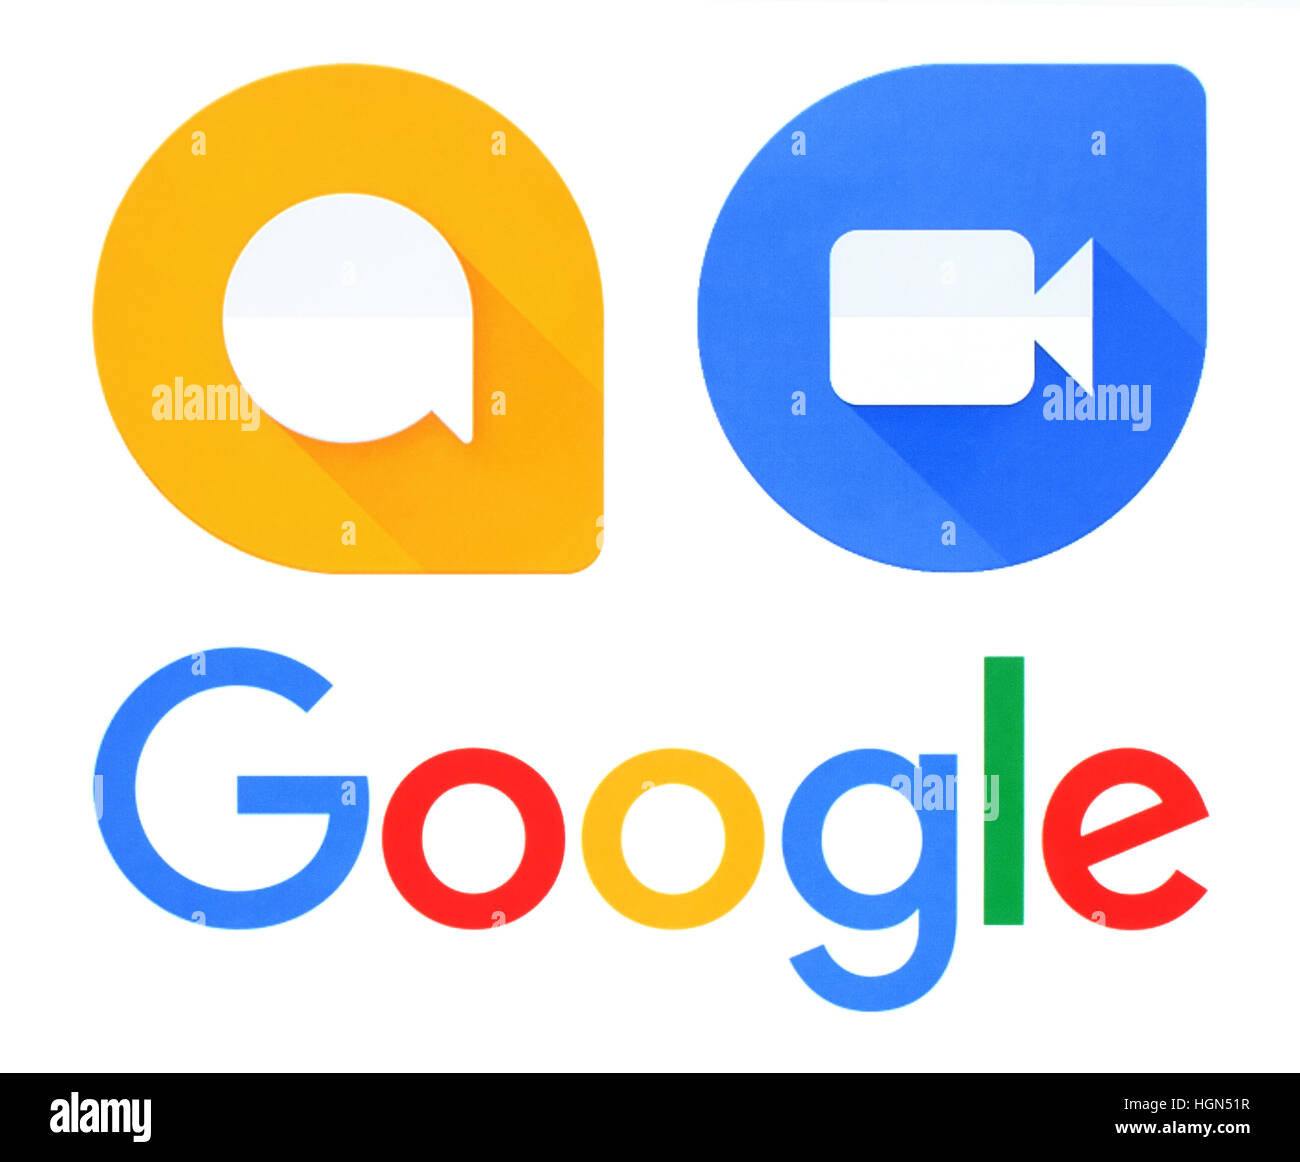 Kiev, Ukraine - September 21, 2016: Google, Allo and Duo logos printed on white paper. Allo is an instant messaging mobile app developed by Google. Du Stock Photo